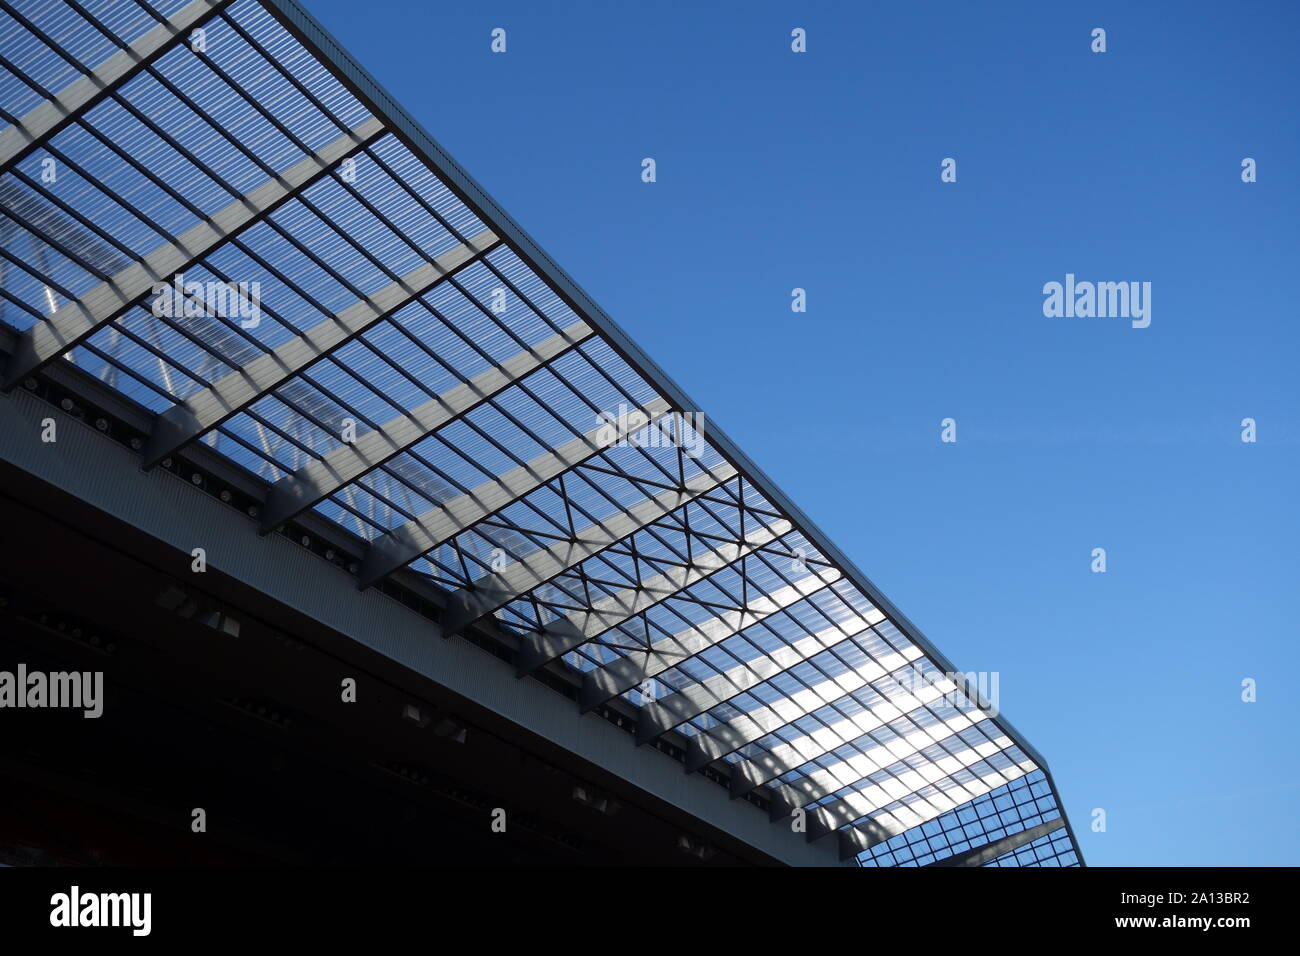 Anfield Main Stand roof. Liverpool football club Stock Photo